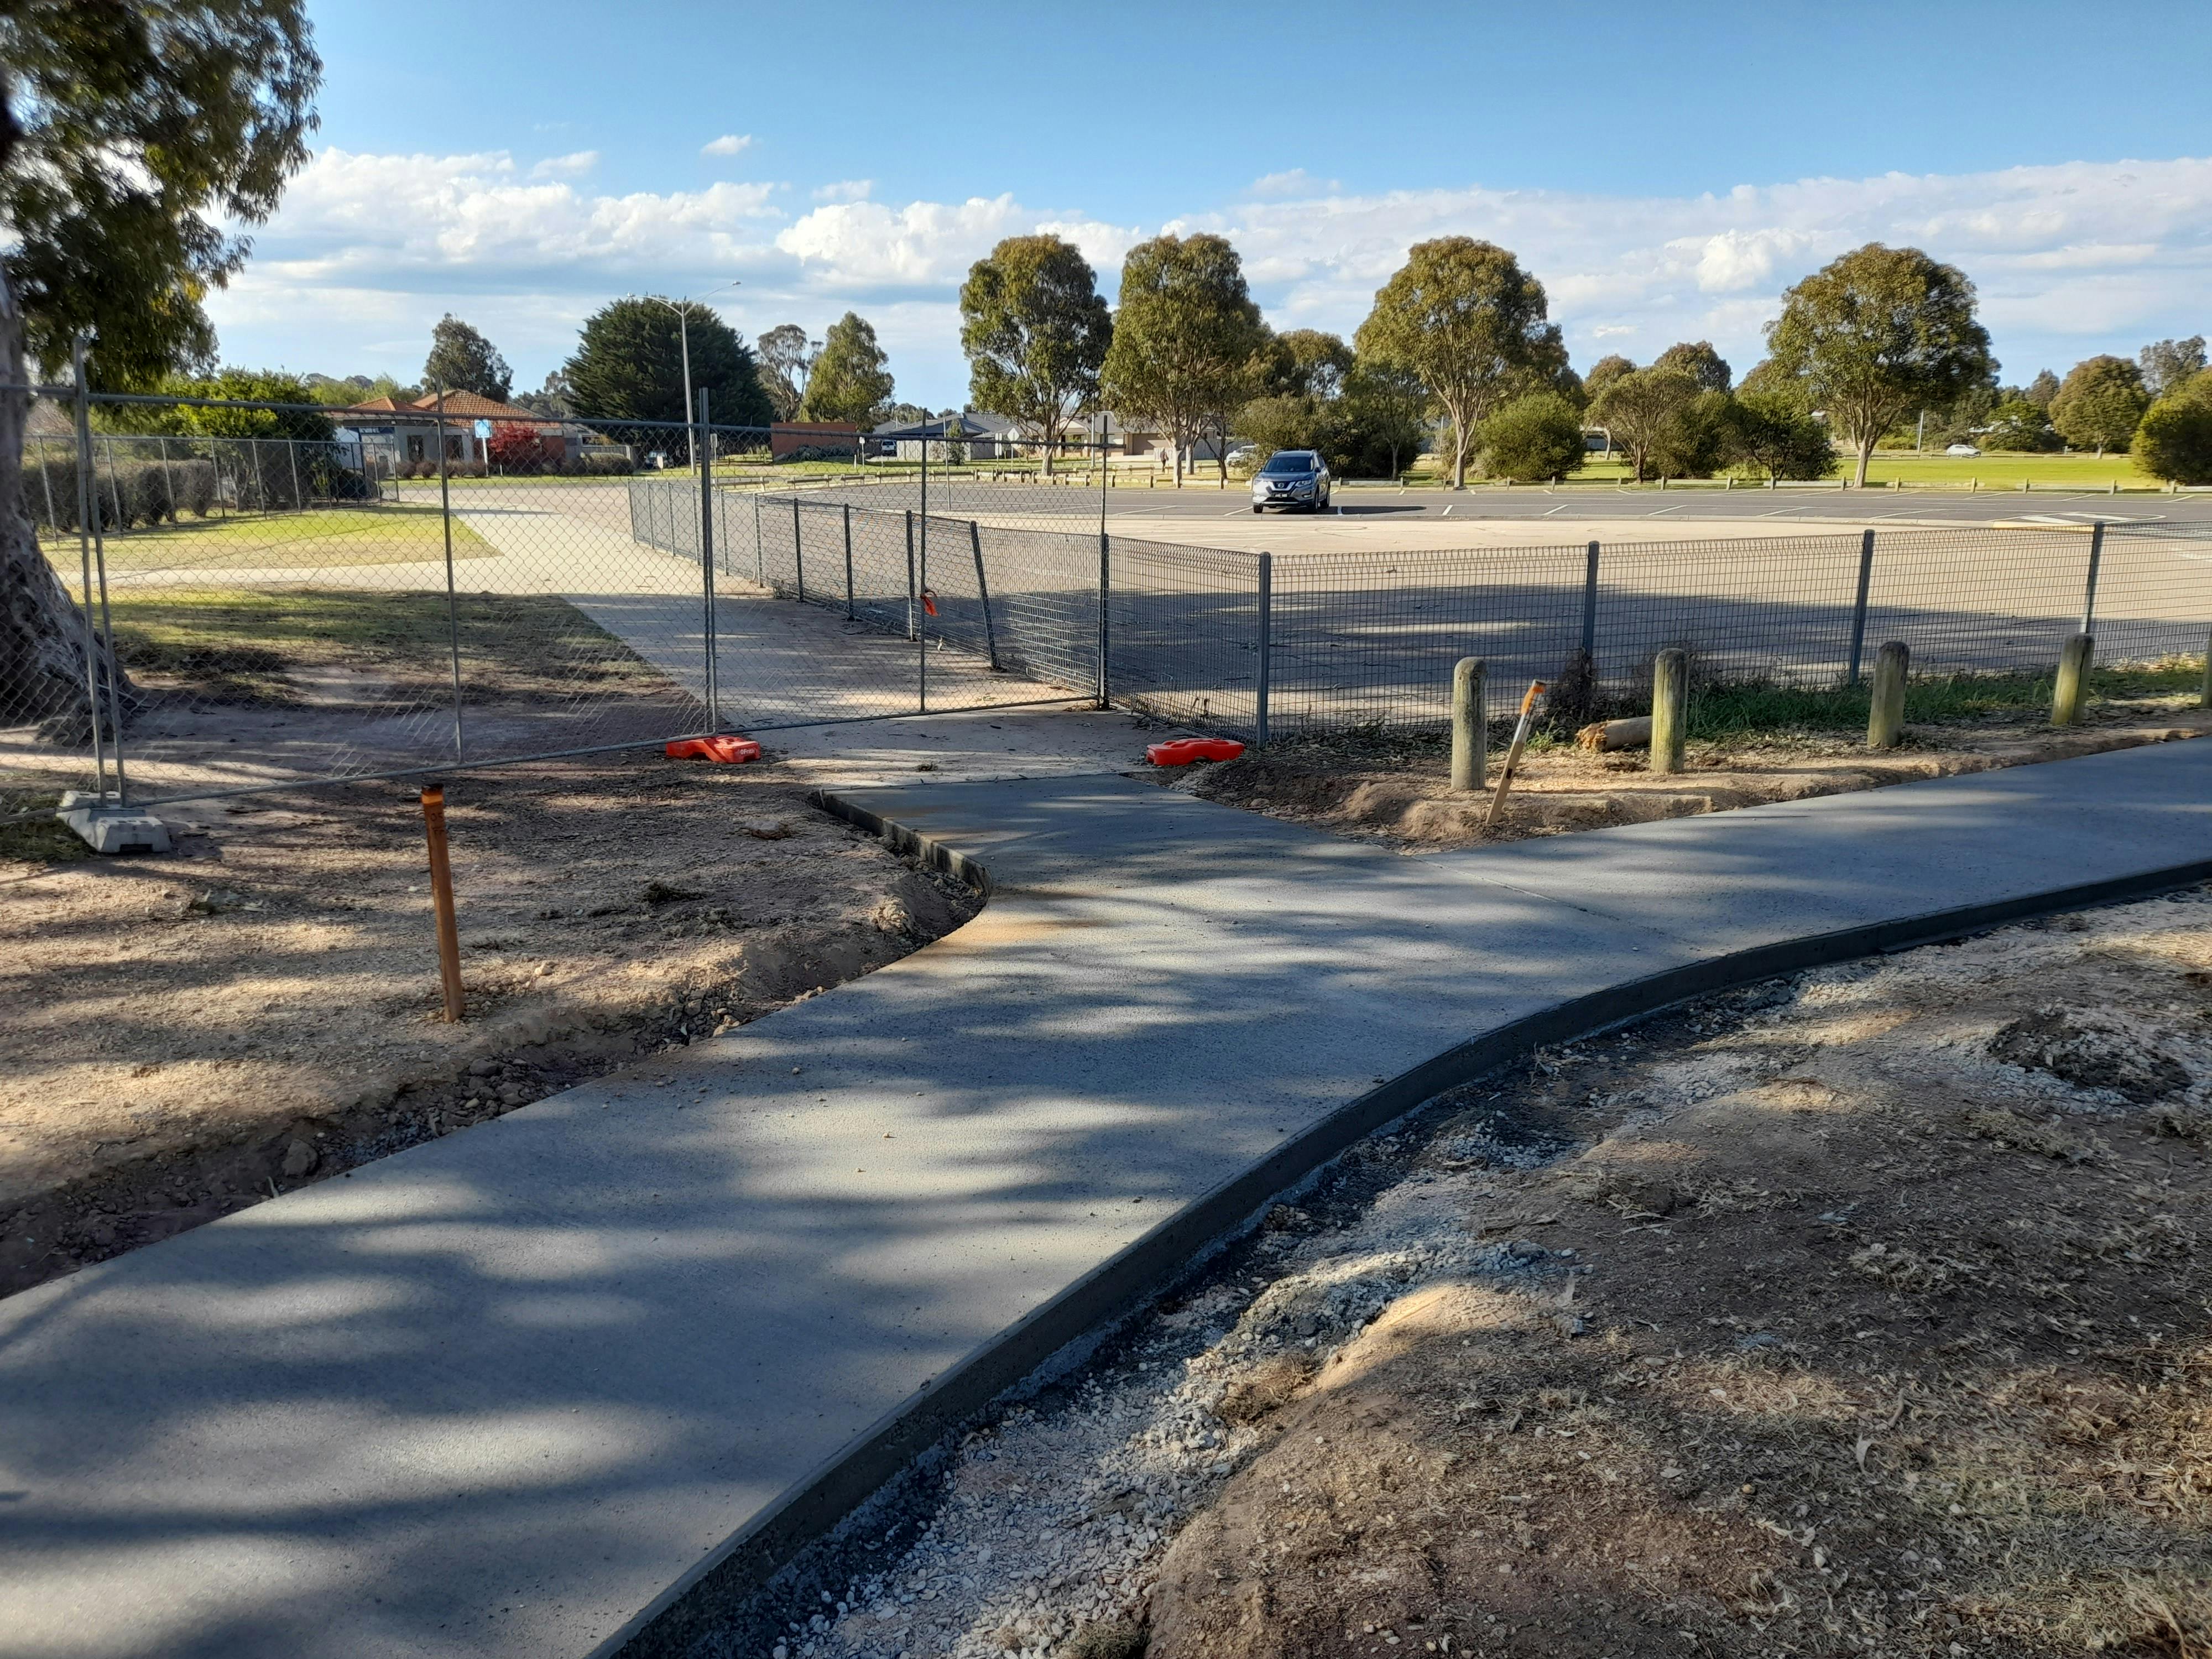 pathways connecting the car park to the playground have been completed